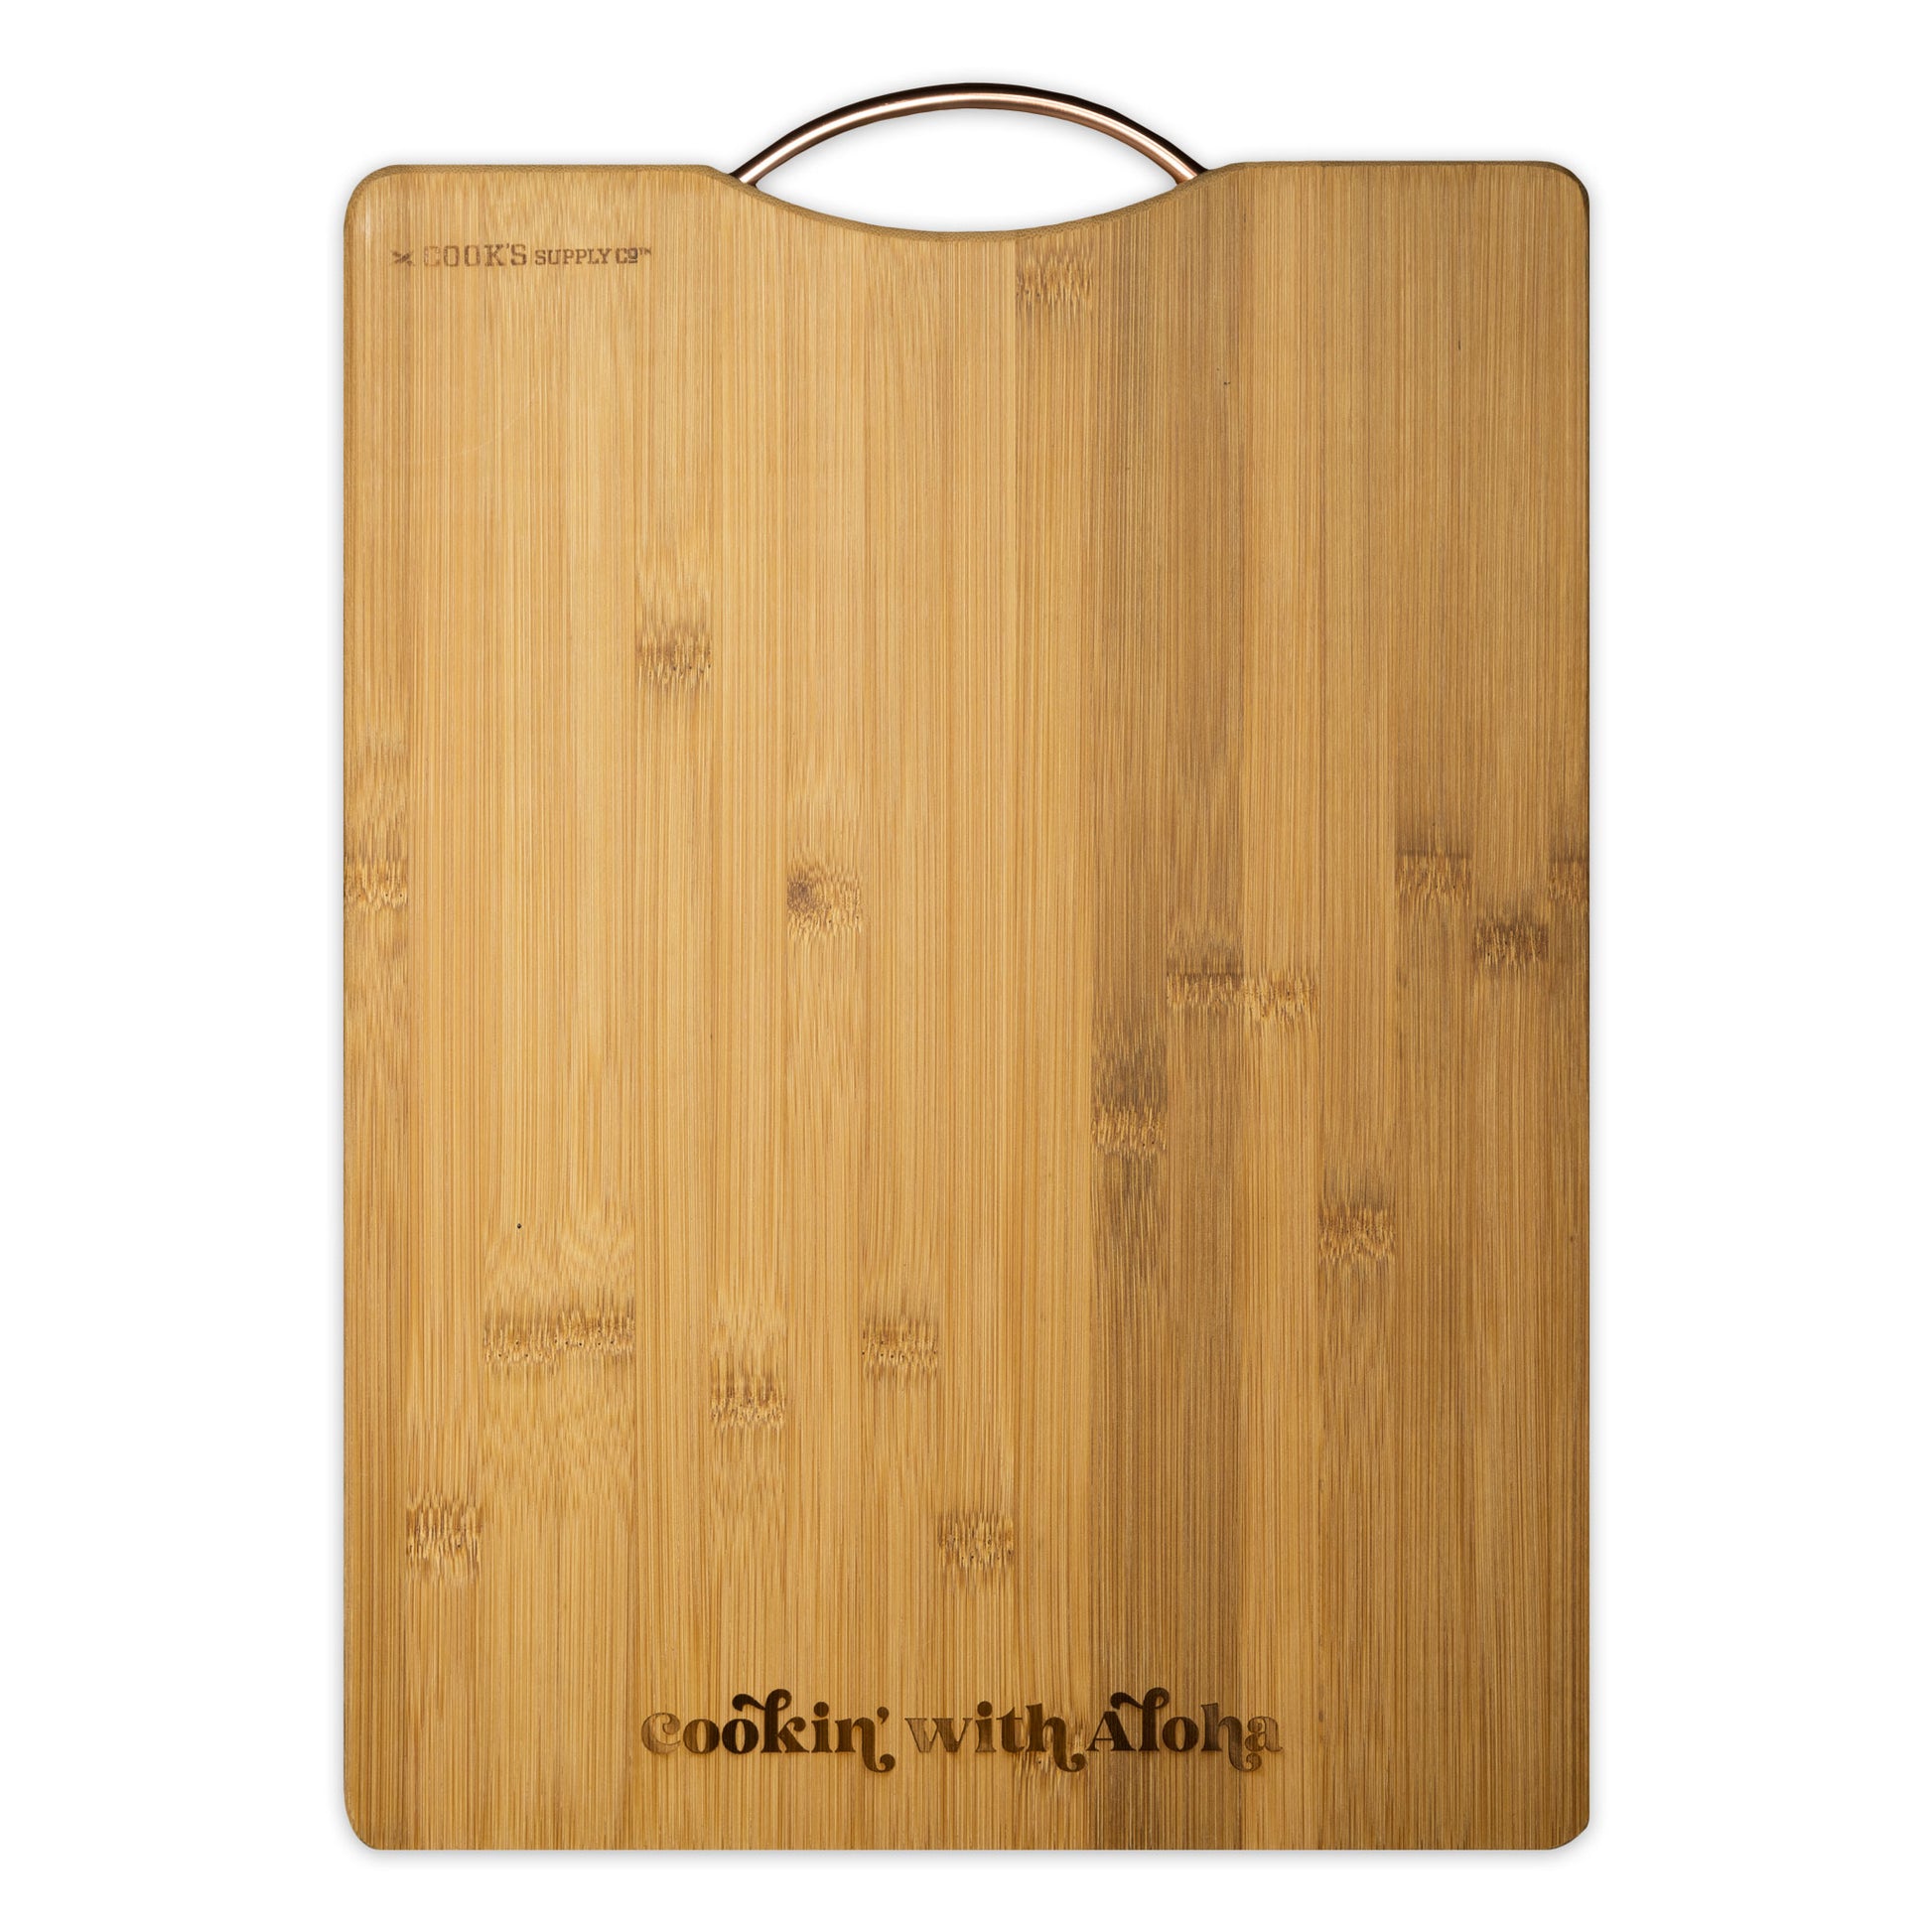 "Cookin' with Aloha" Engraved Solid Bamboo Cutting Board